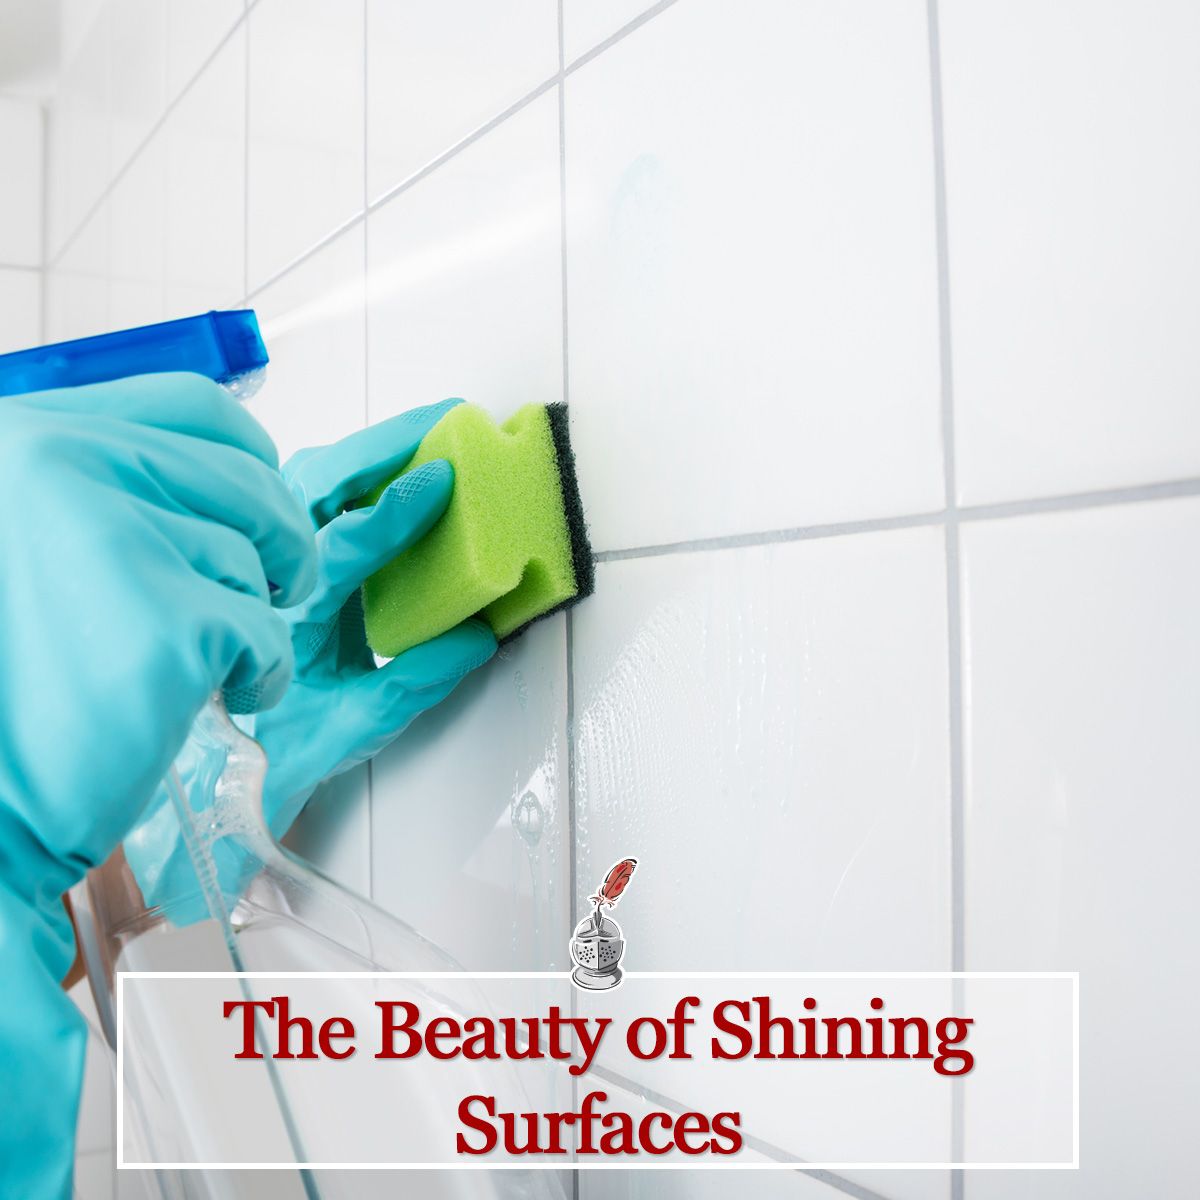 The Beauty of Shining Surfaces